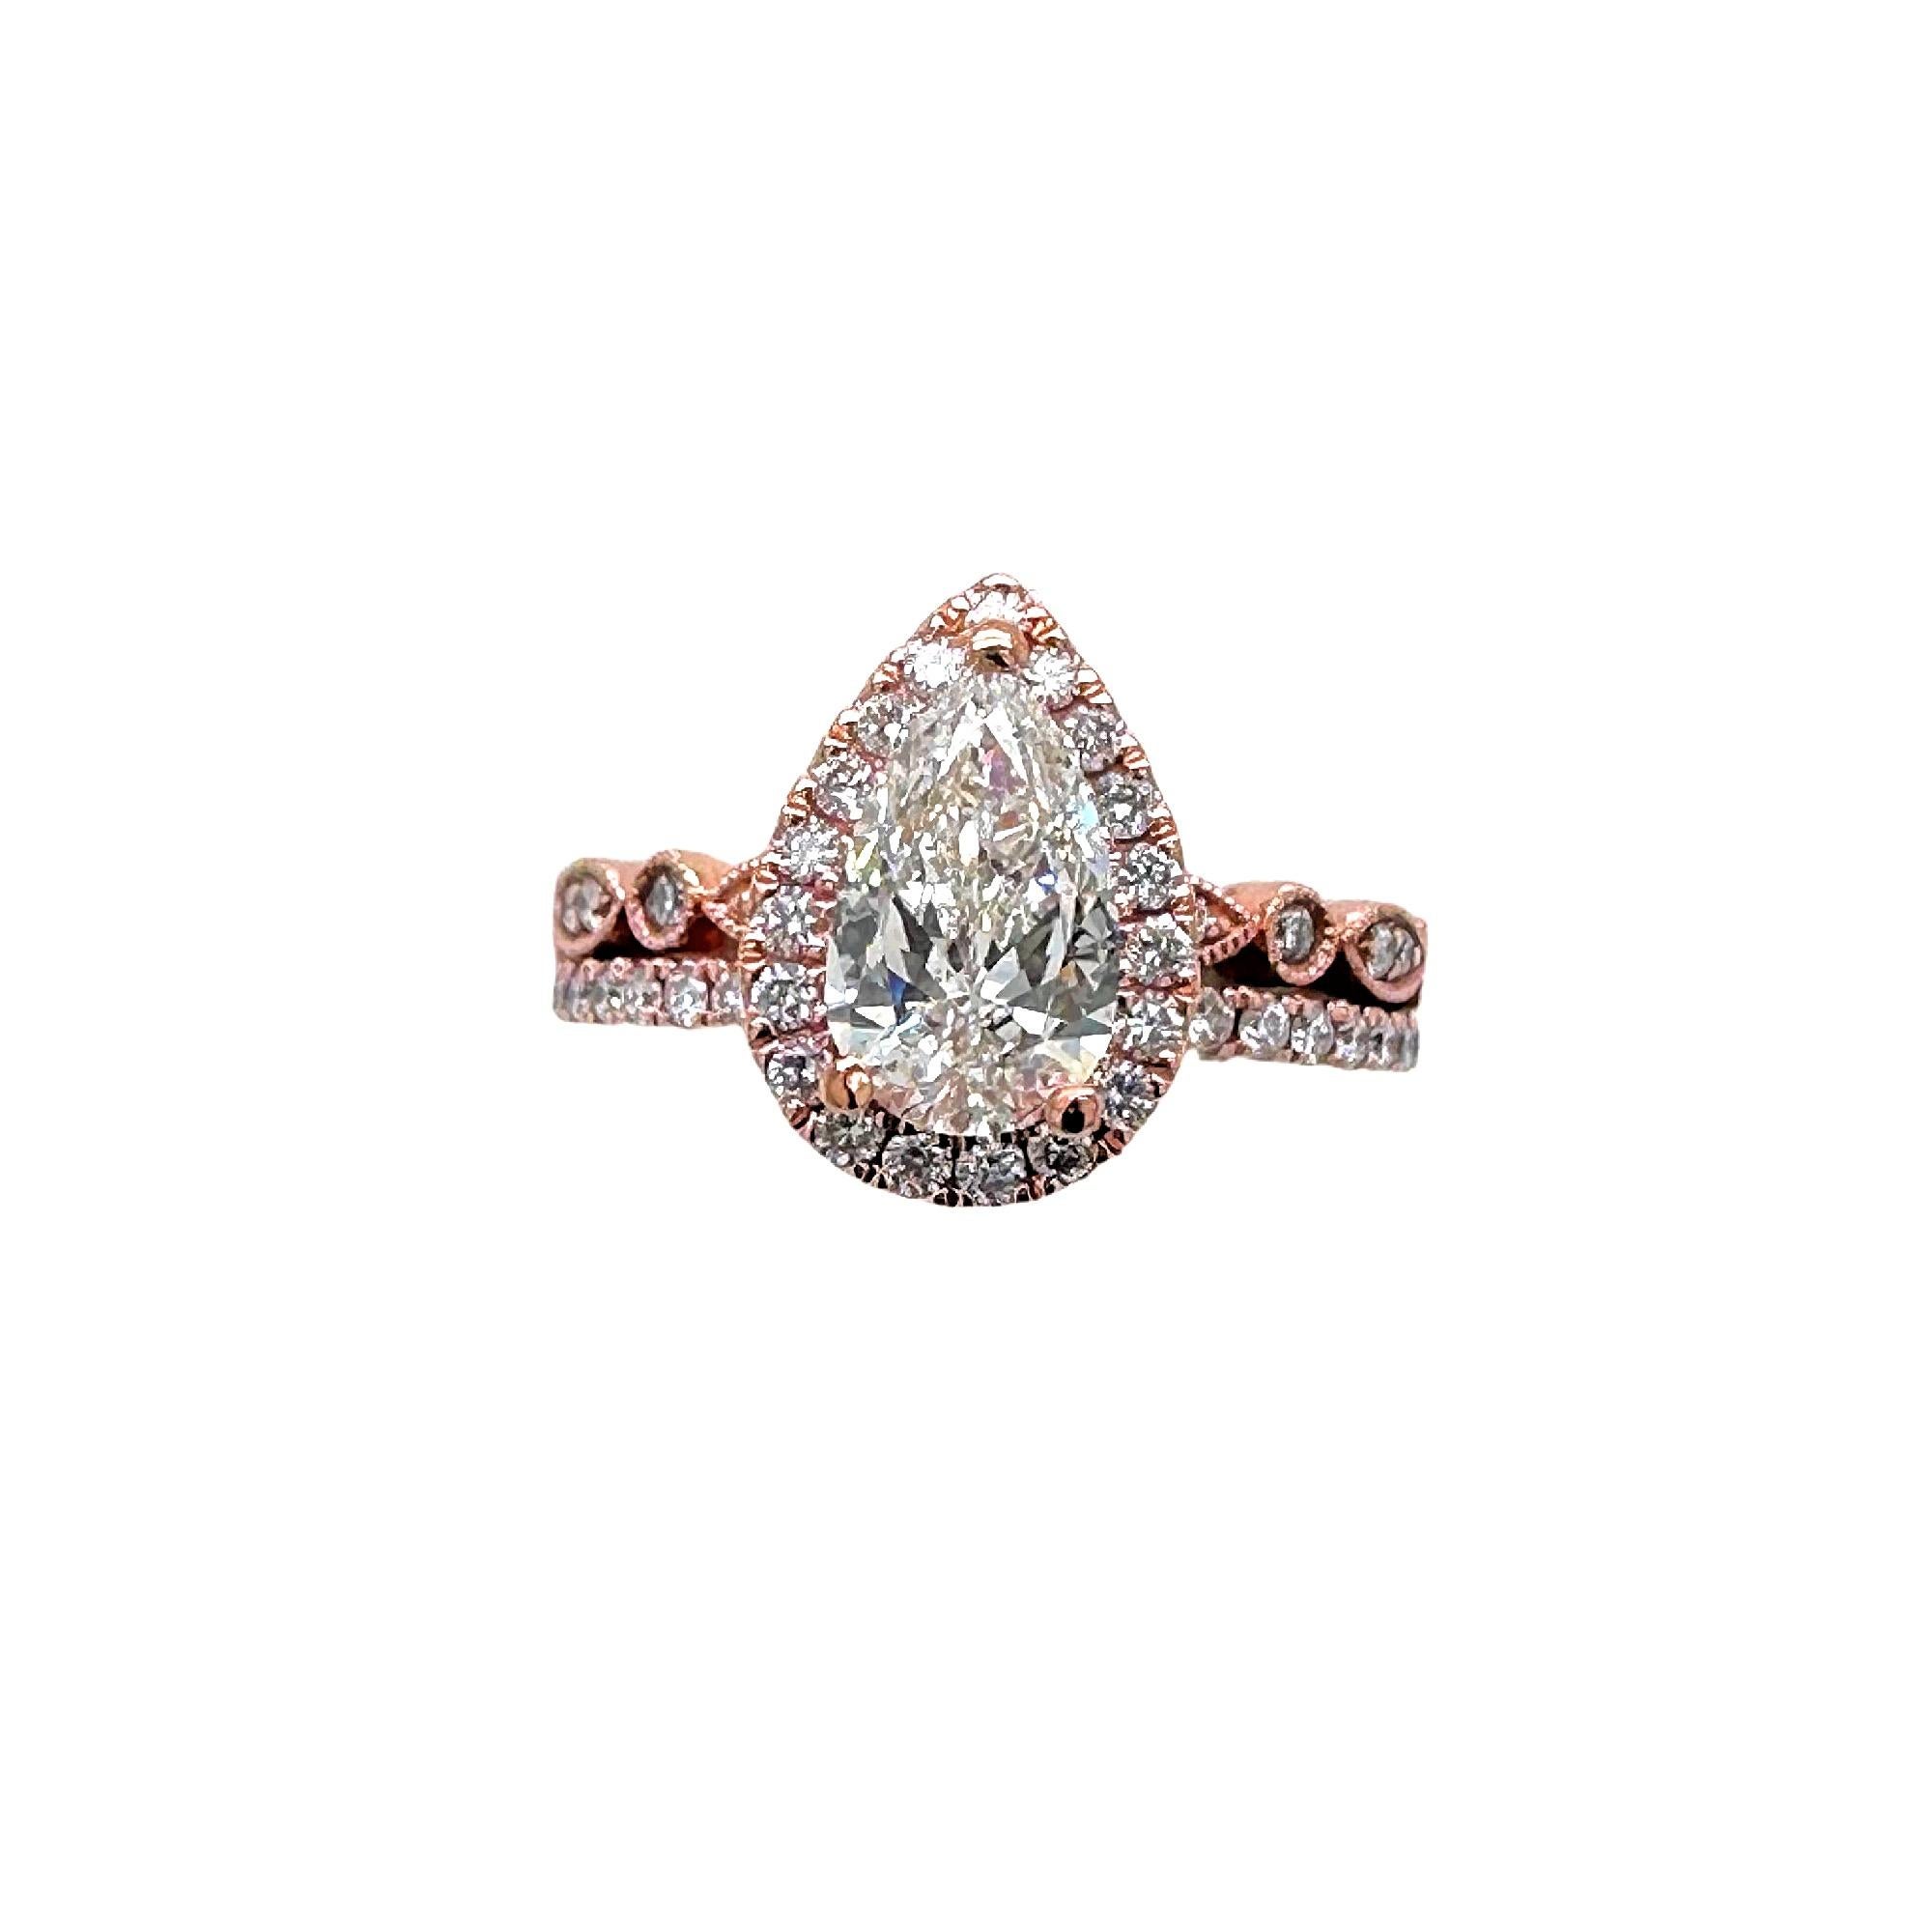 Robins Brothers Signature Pear Diamond 1.375tcw 14k Rose Gold Engagement Ring For Sale 4